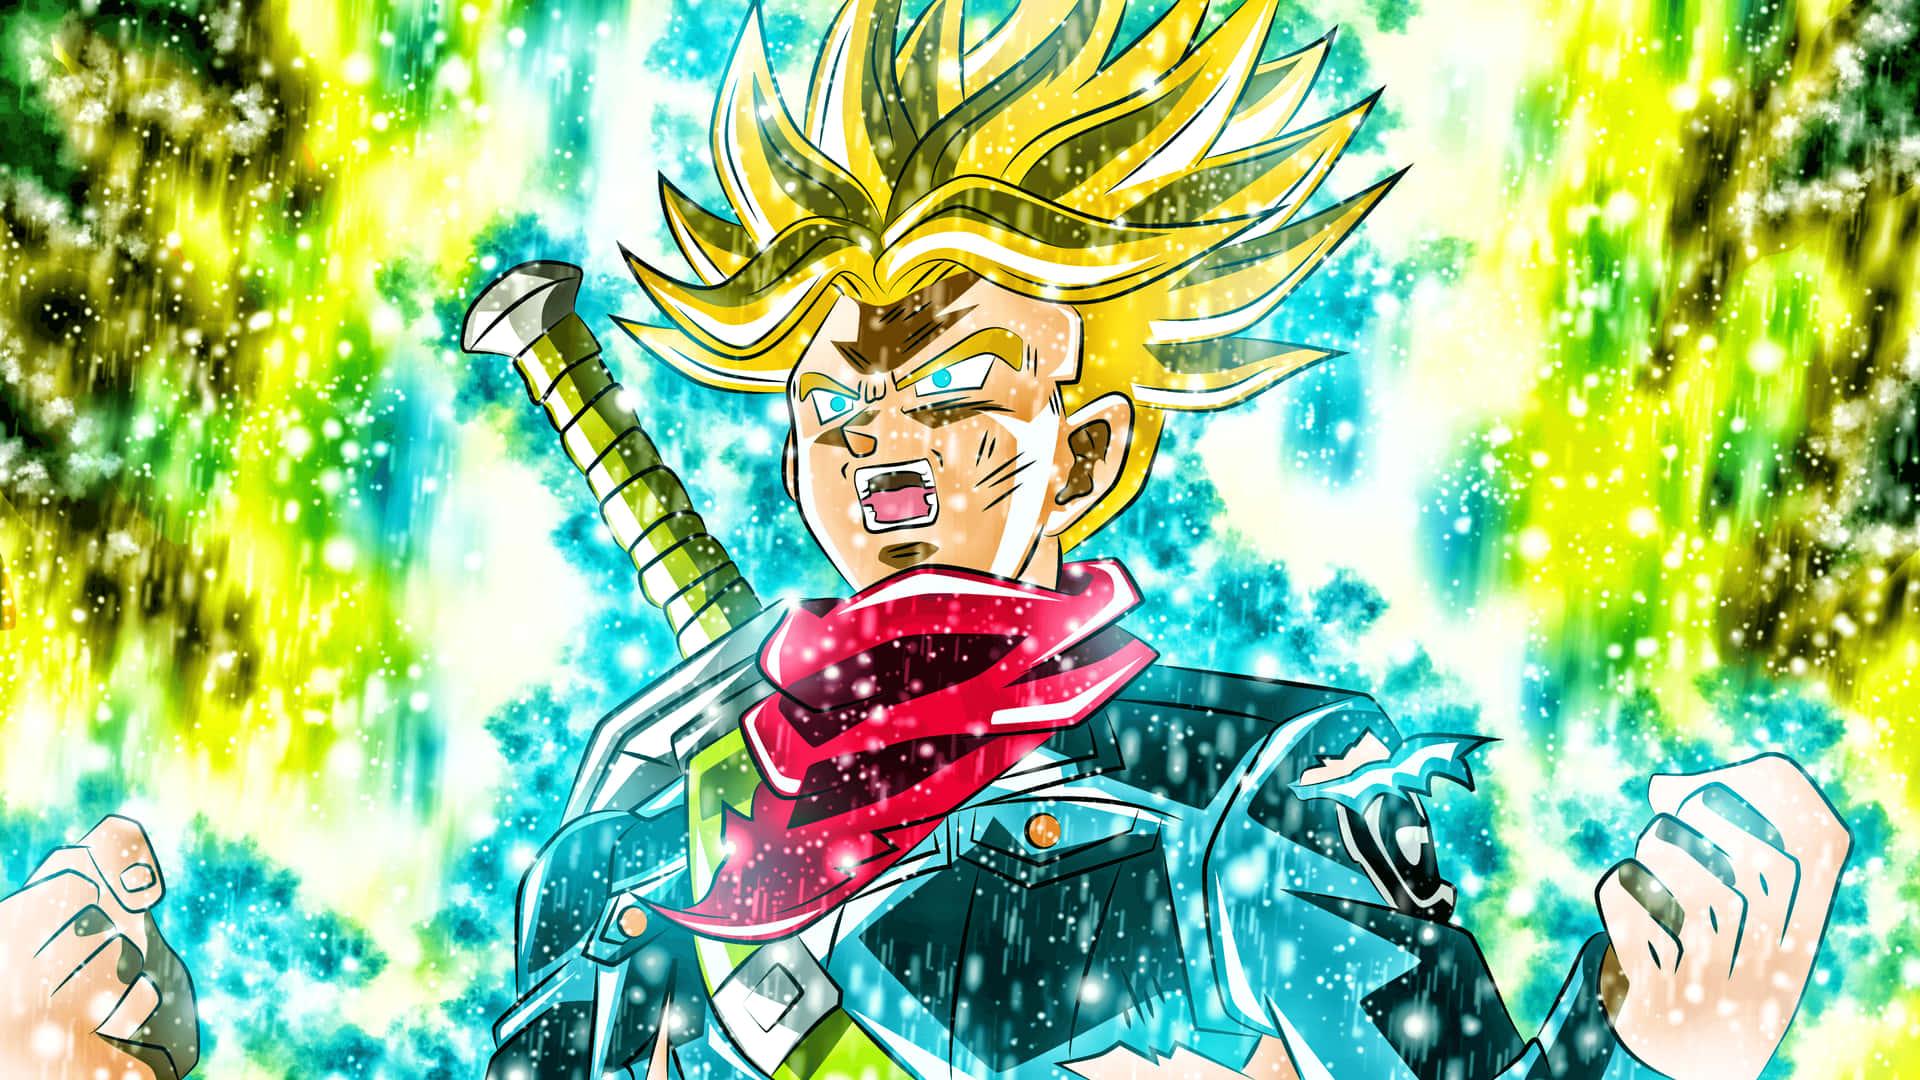 100+] Trunks Phone Wallpapers | Wallpapers.com